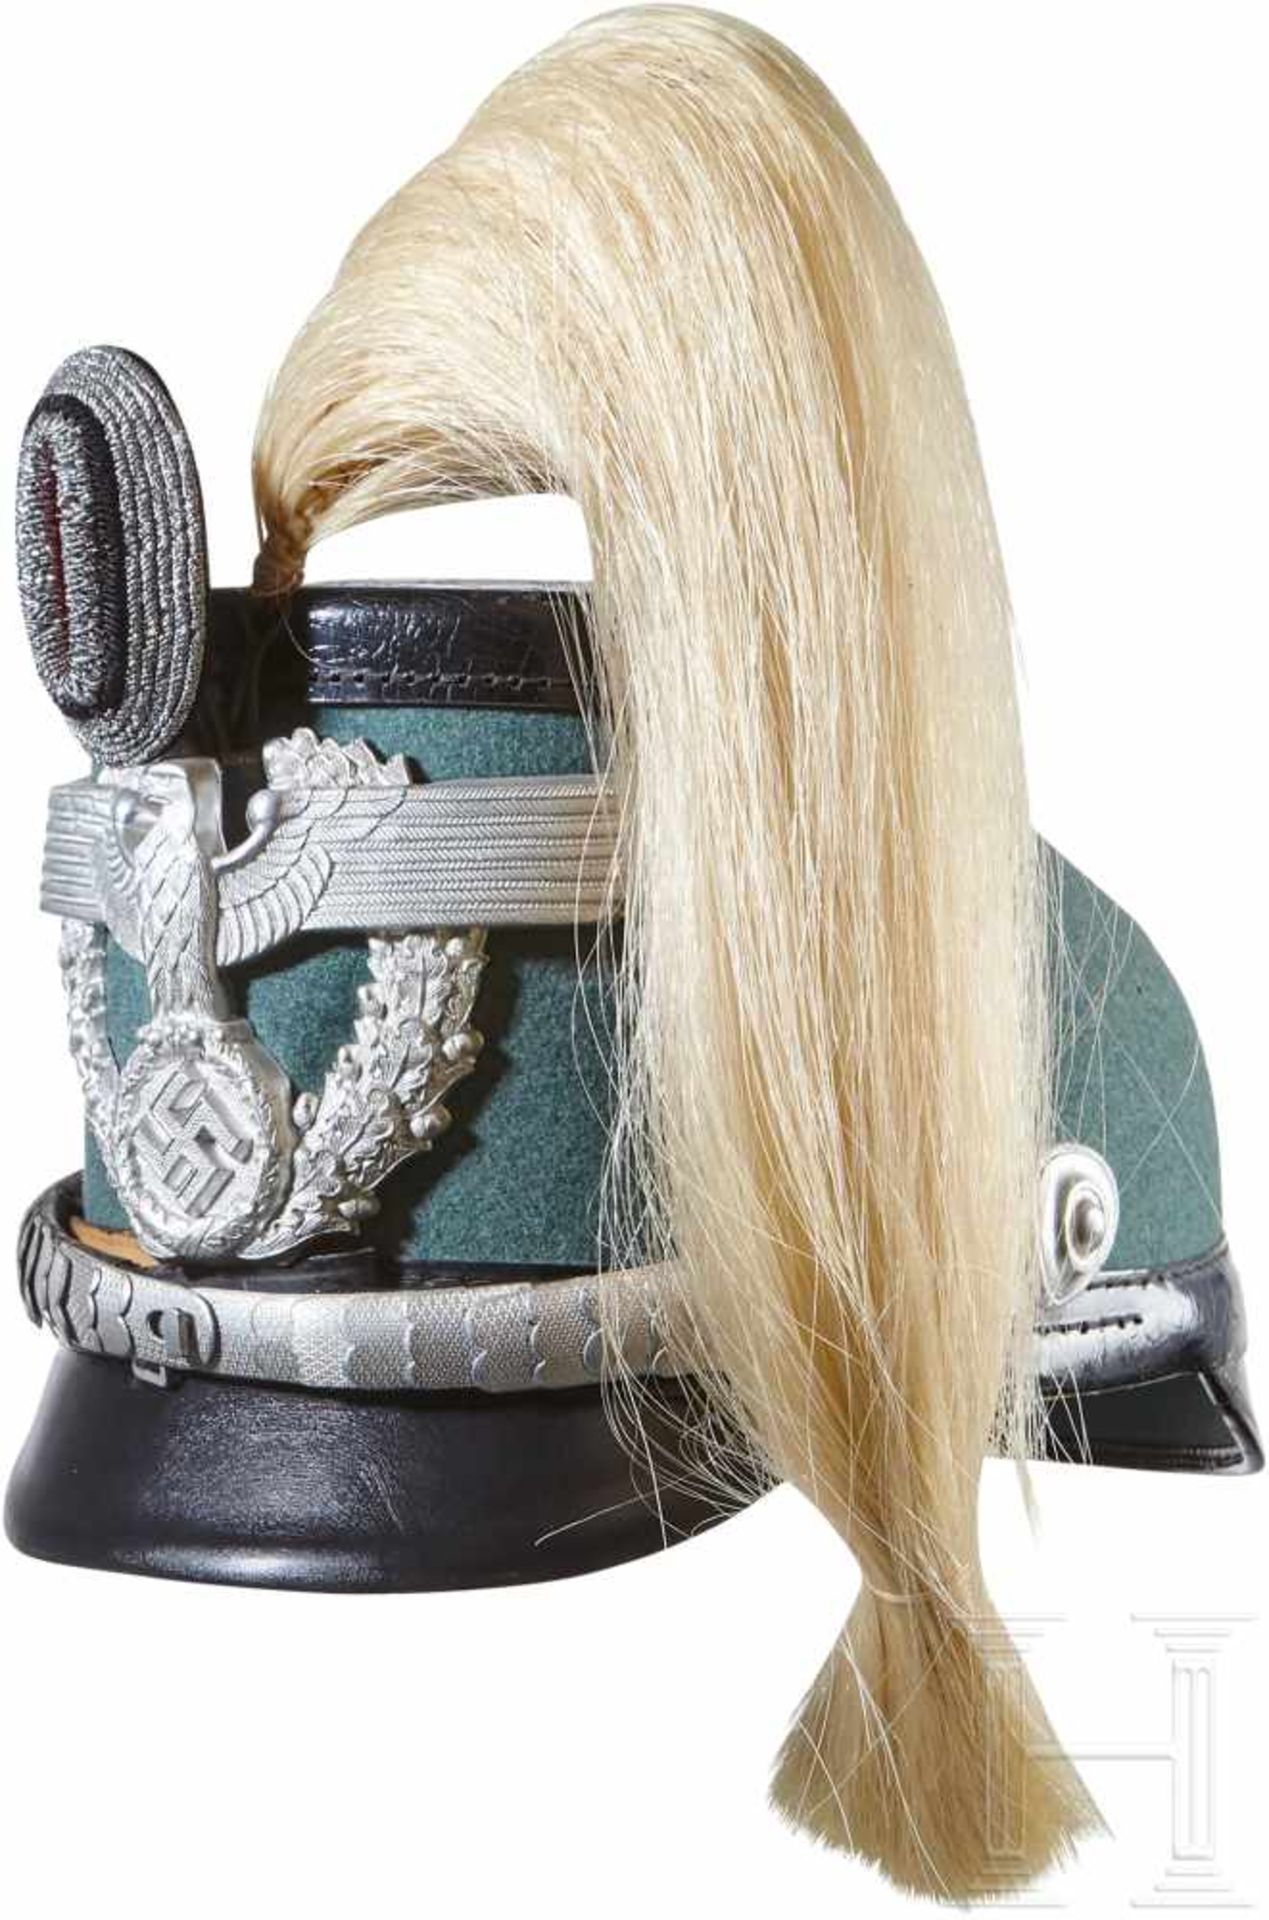 A Shako for Officers of the Local Municipal PoliceVulcan fibre body with police-green wool, dual